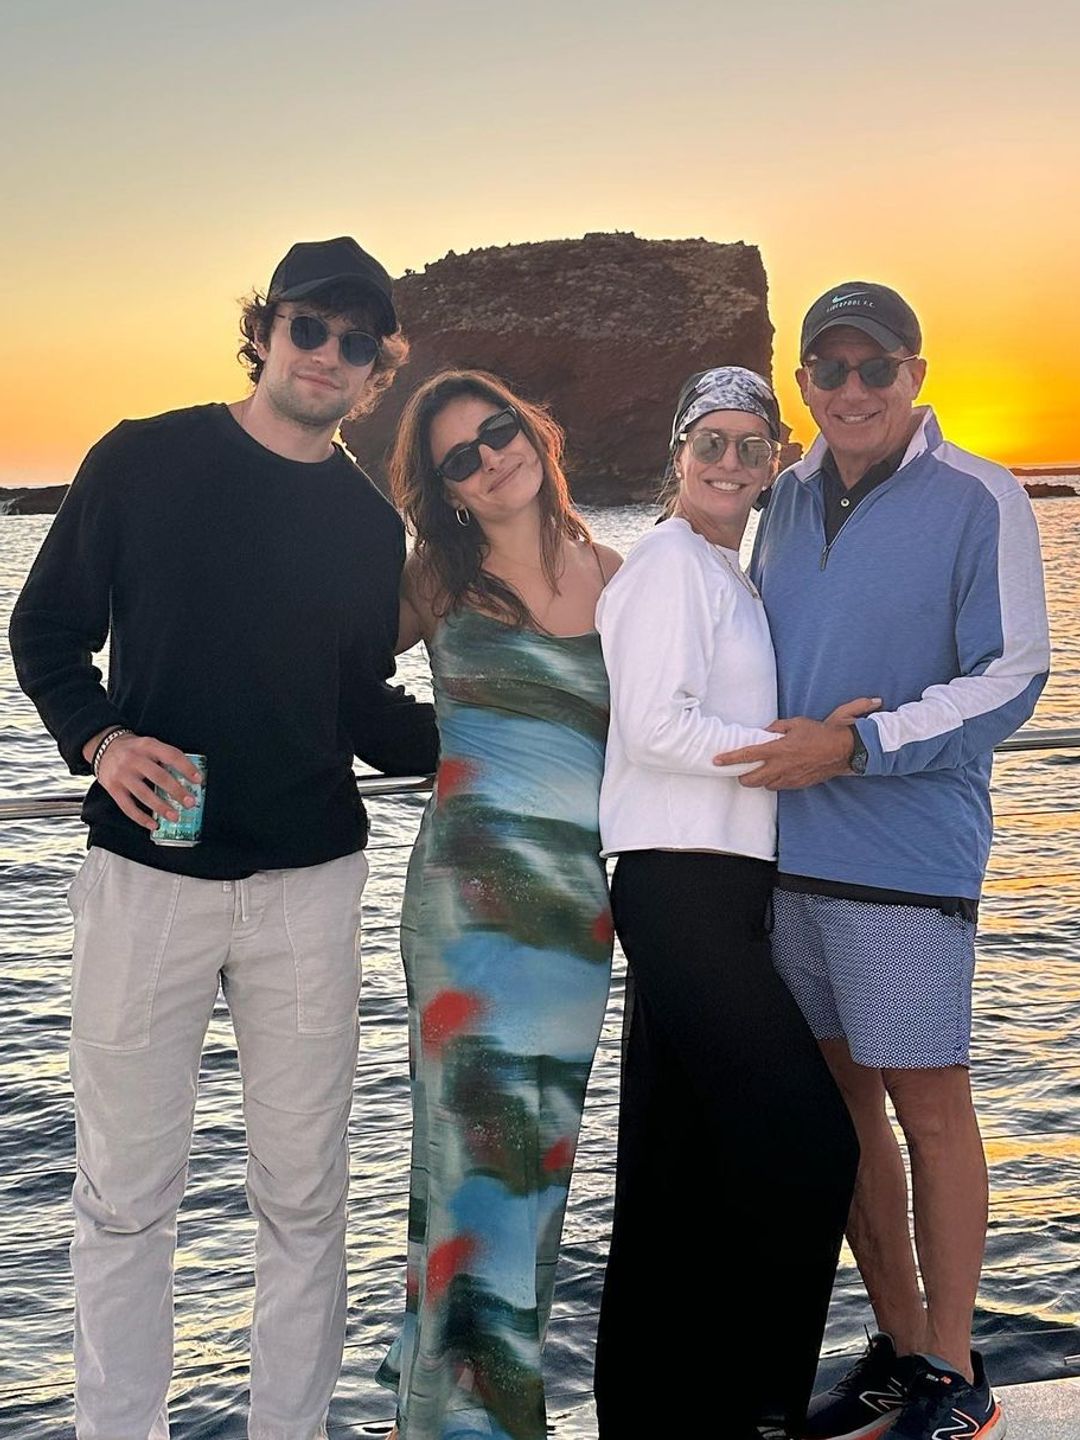 The blended family stood smiling wearing sunglasses on a beach at sunrise